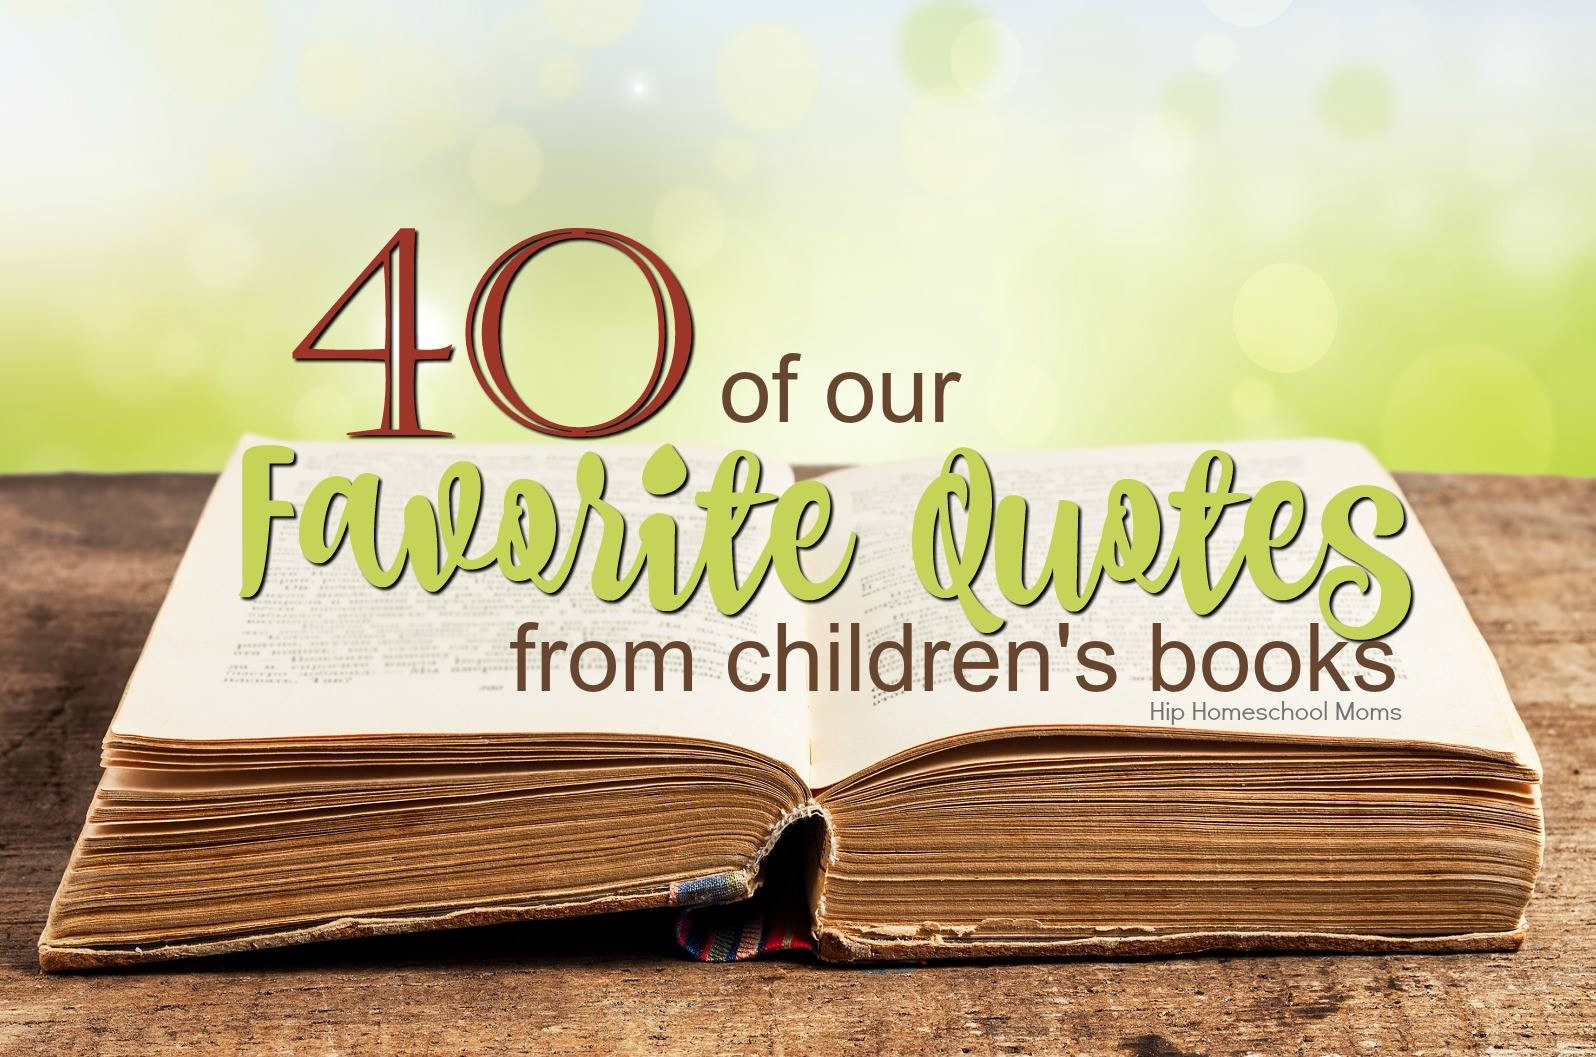 Quotes From Kids Books
 40 of Our Favorite Quotes from Children s Books Hip